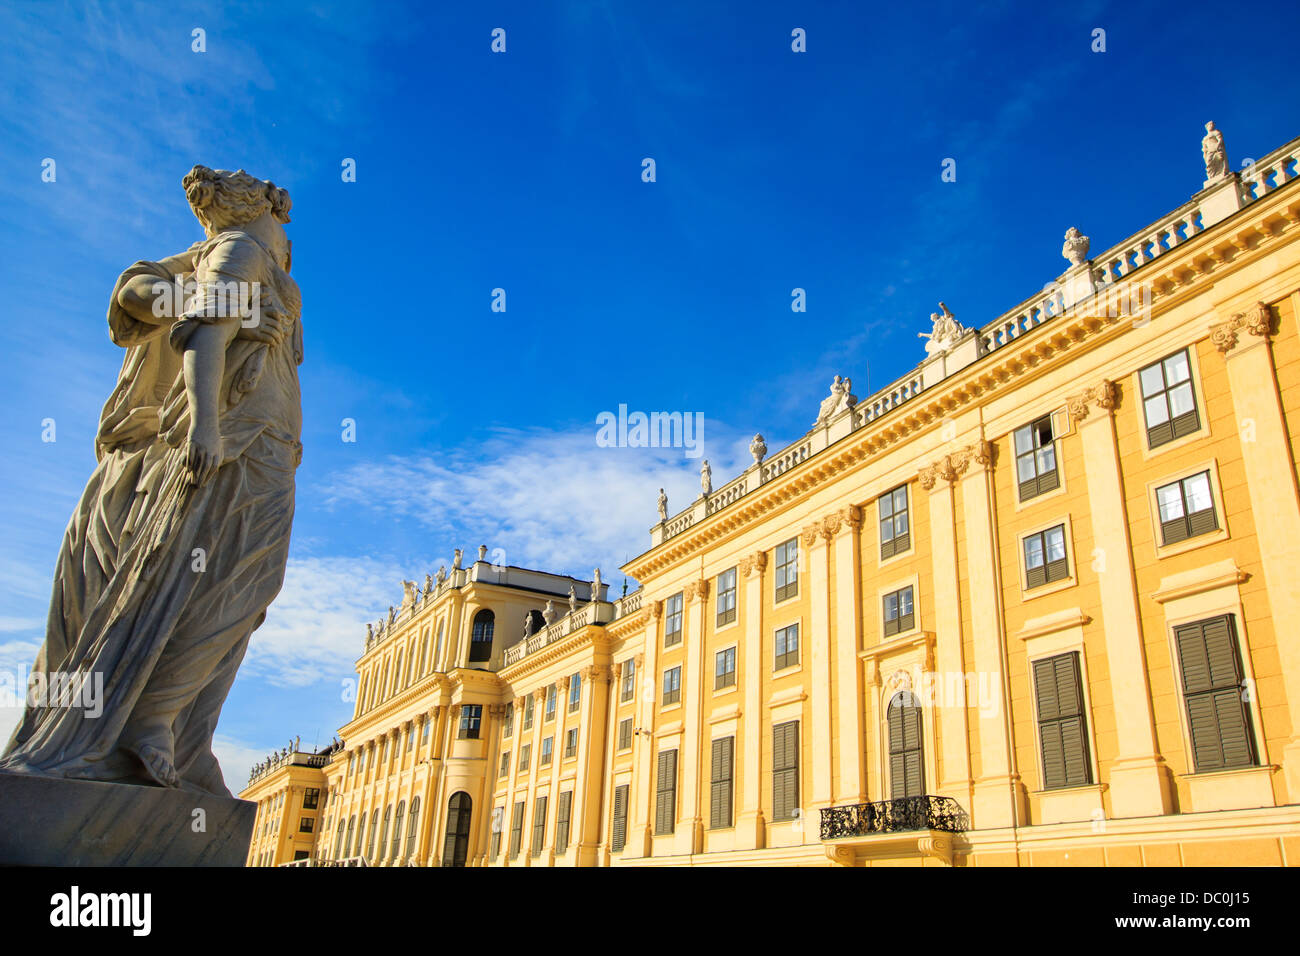 Vienna - Greek statue with the Schonbrunn palace on the background. Stock Photo